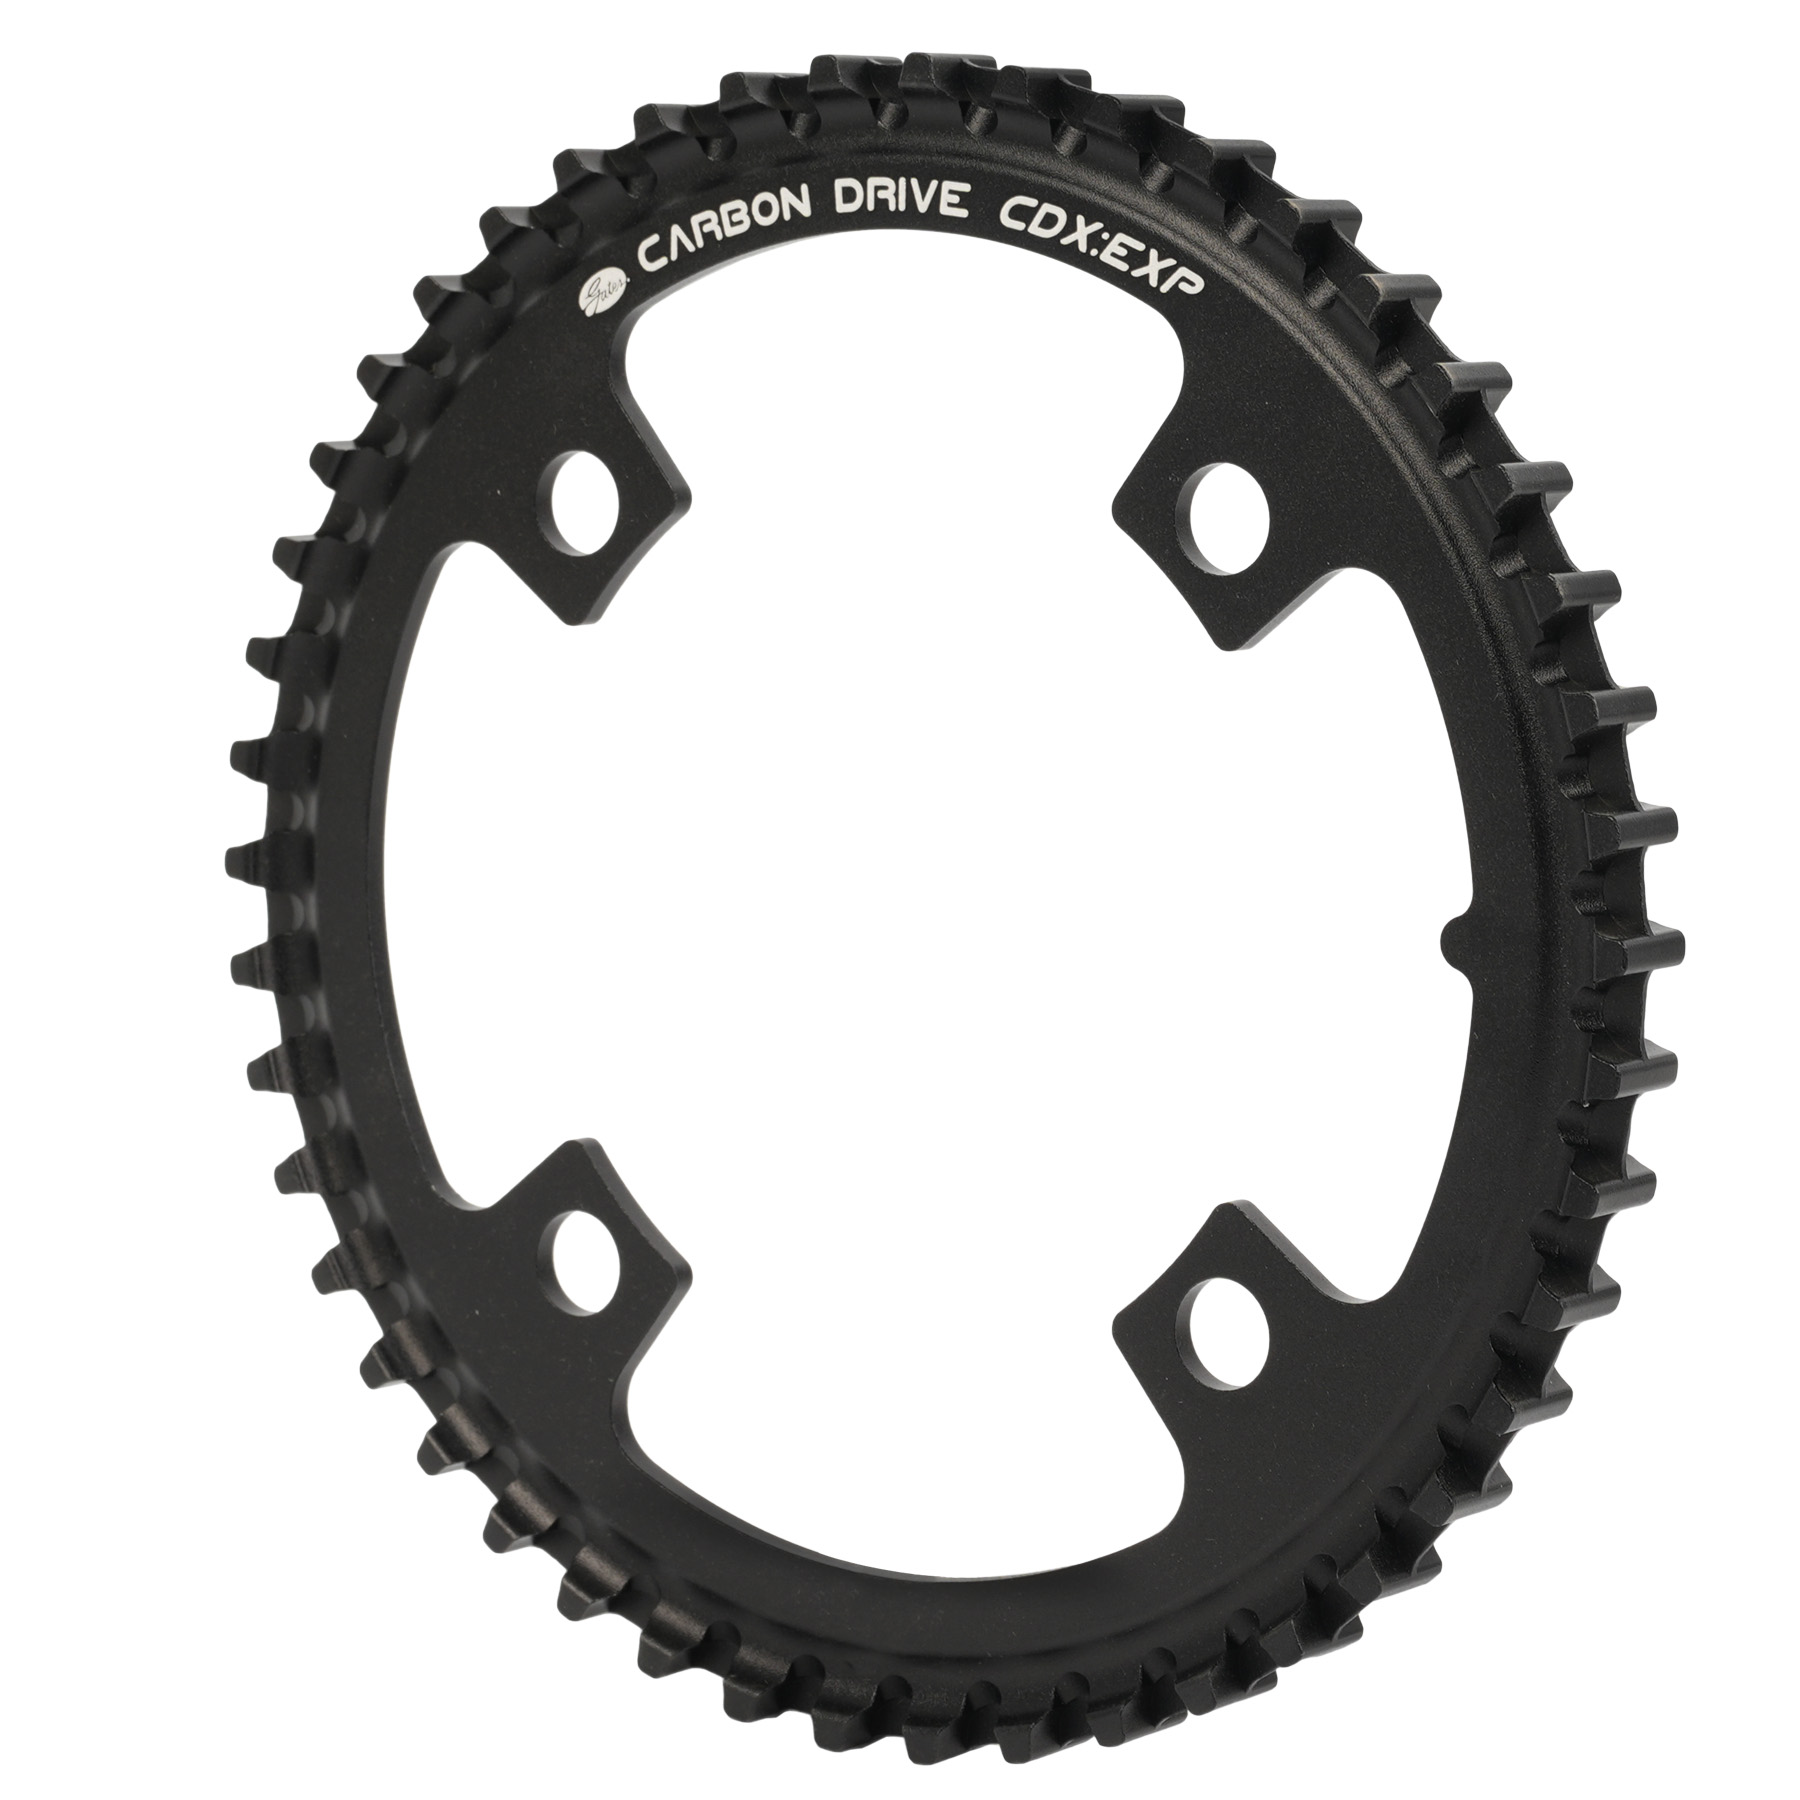 Productfoto van Gates Carbon Drive CDX Centertrack Expedition Sprocket - Front | 4x BCD 104